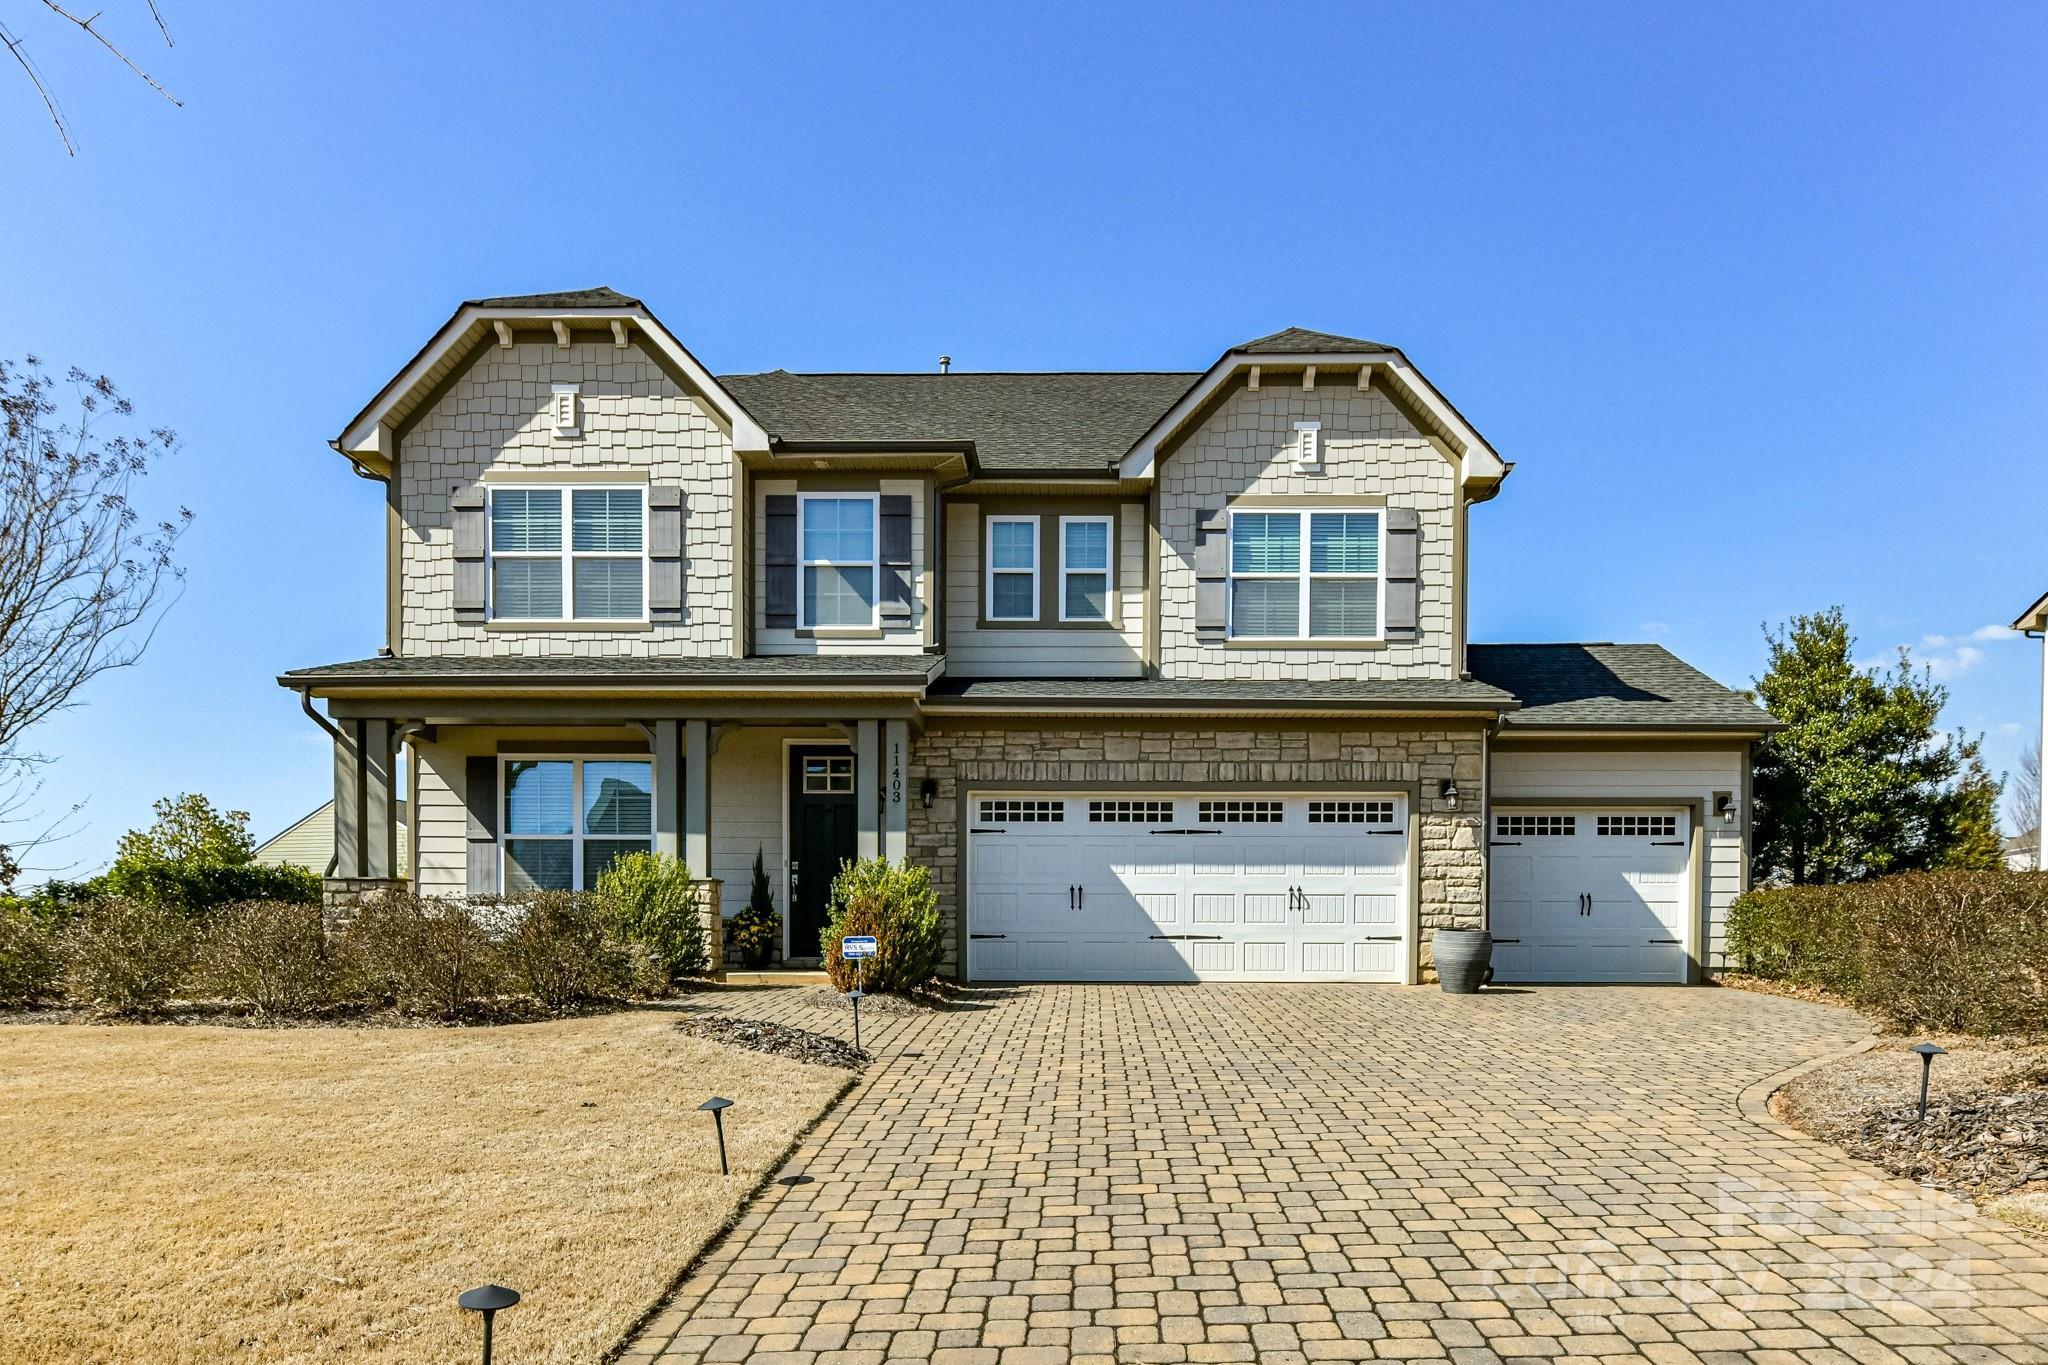 Photo one of 11403 Grenfell Ave Huntersville NC 28078 | MLS 4113563